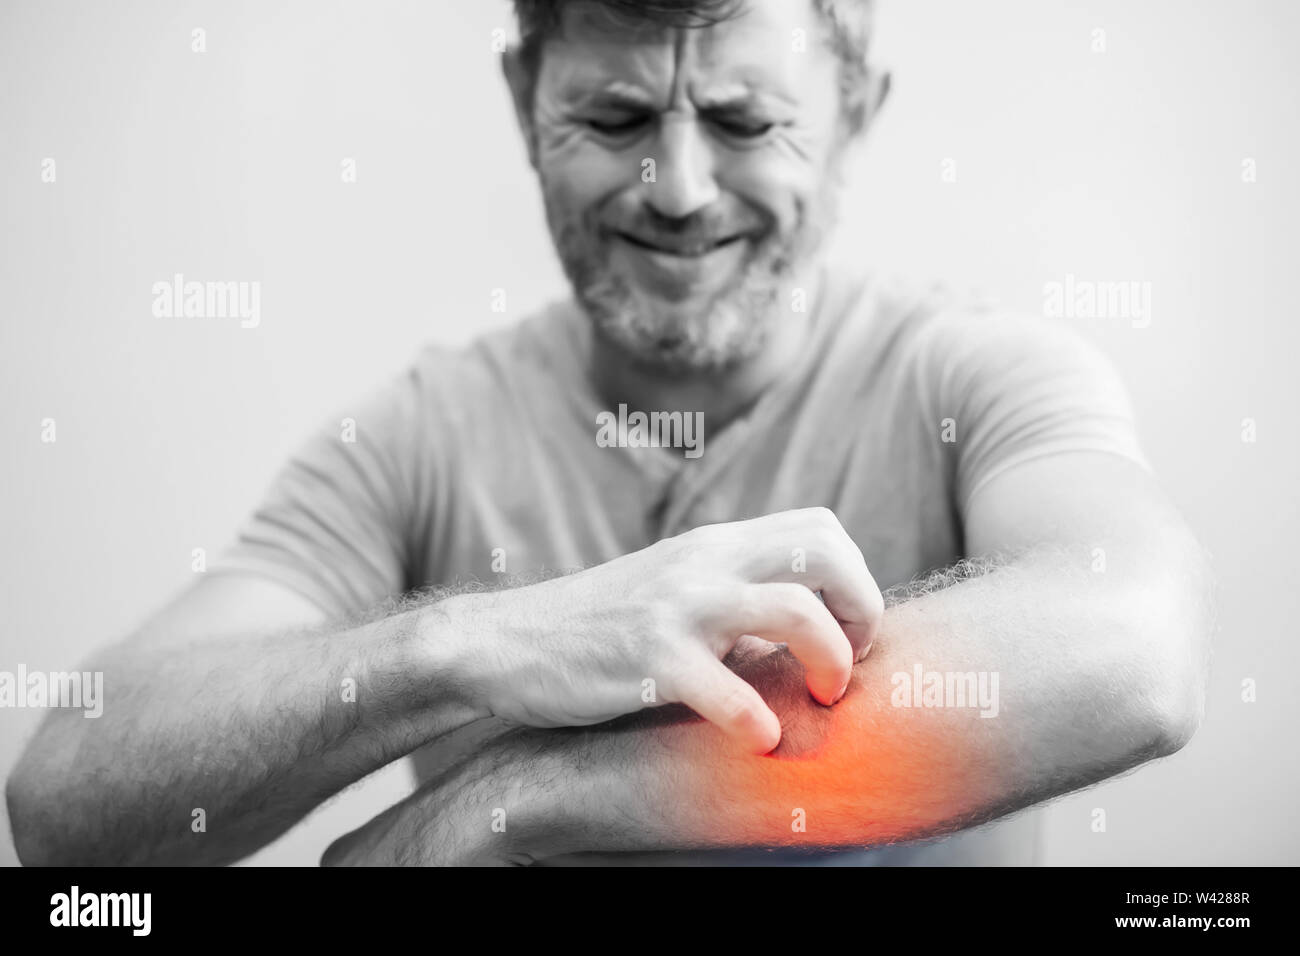 People scratch the itch with hand, Elbow, itching, Healthcare And Medicine, Men with skin problem concept Stock Photo